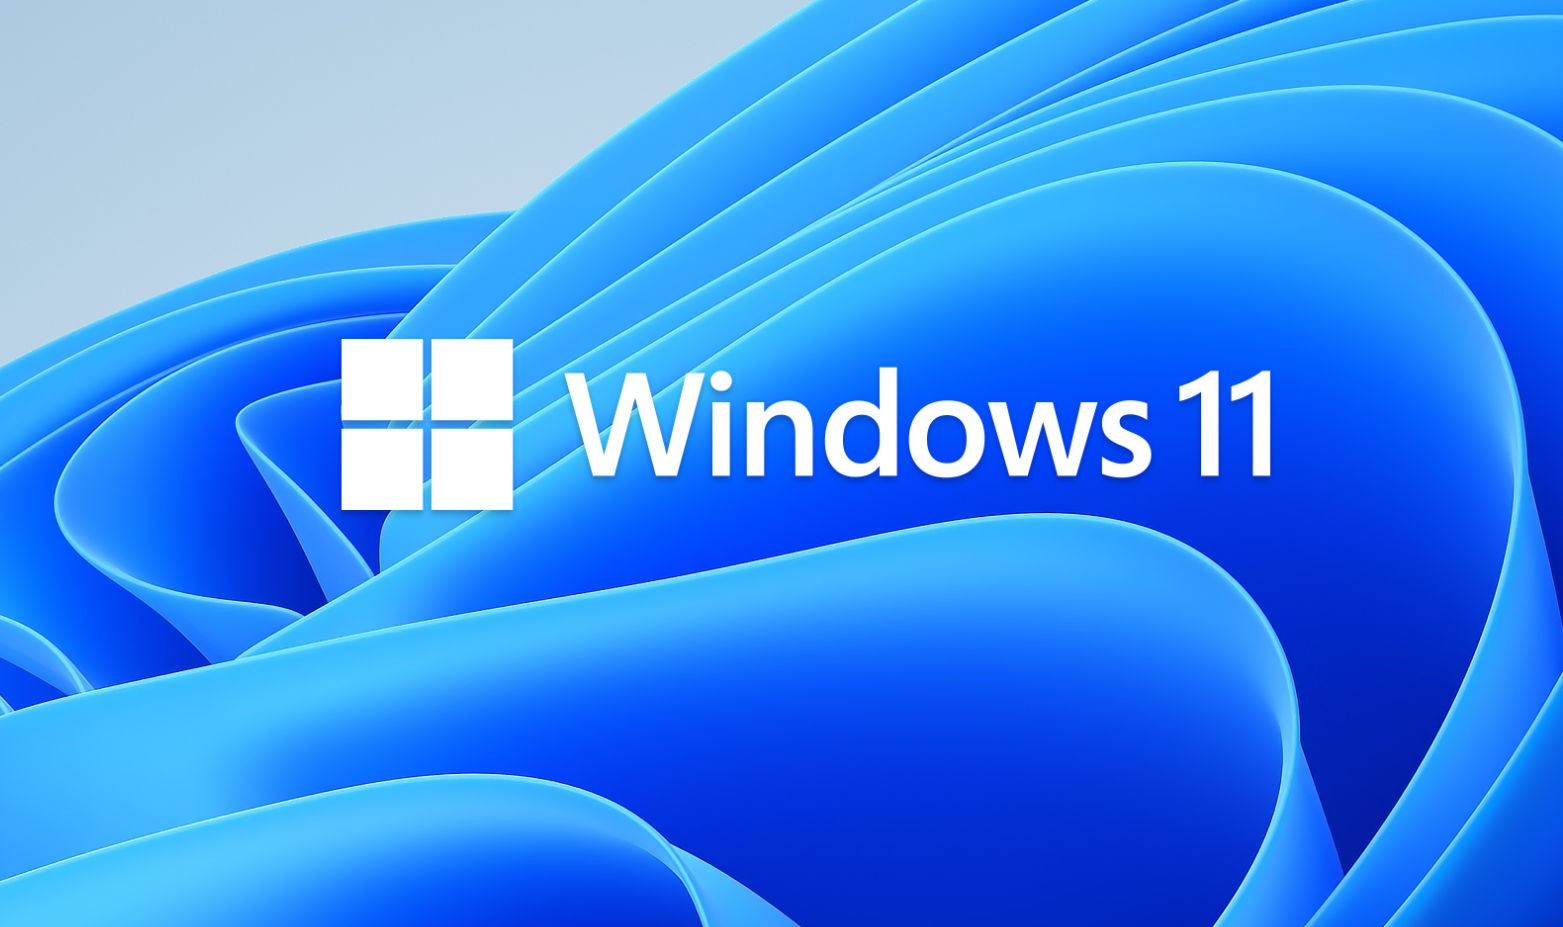 Microsoft says TPM 2.0 update necessary for Windows  11. What is it?